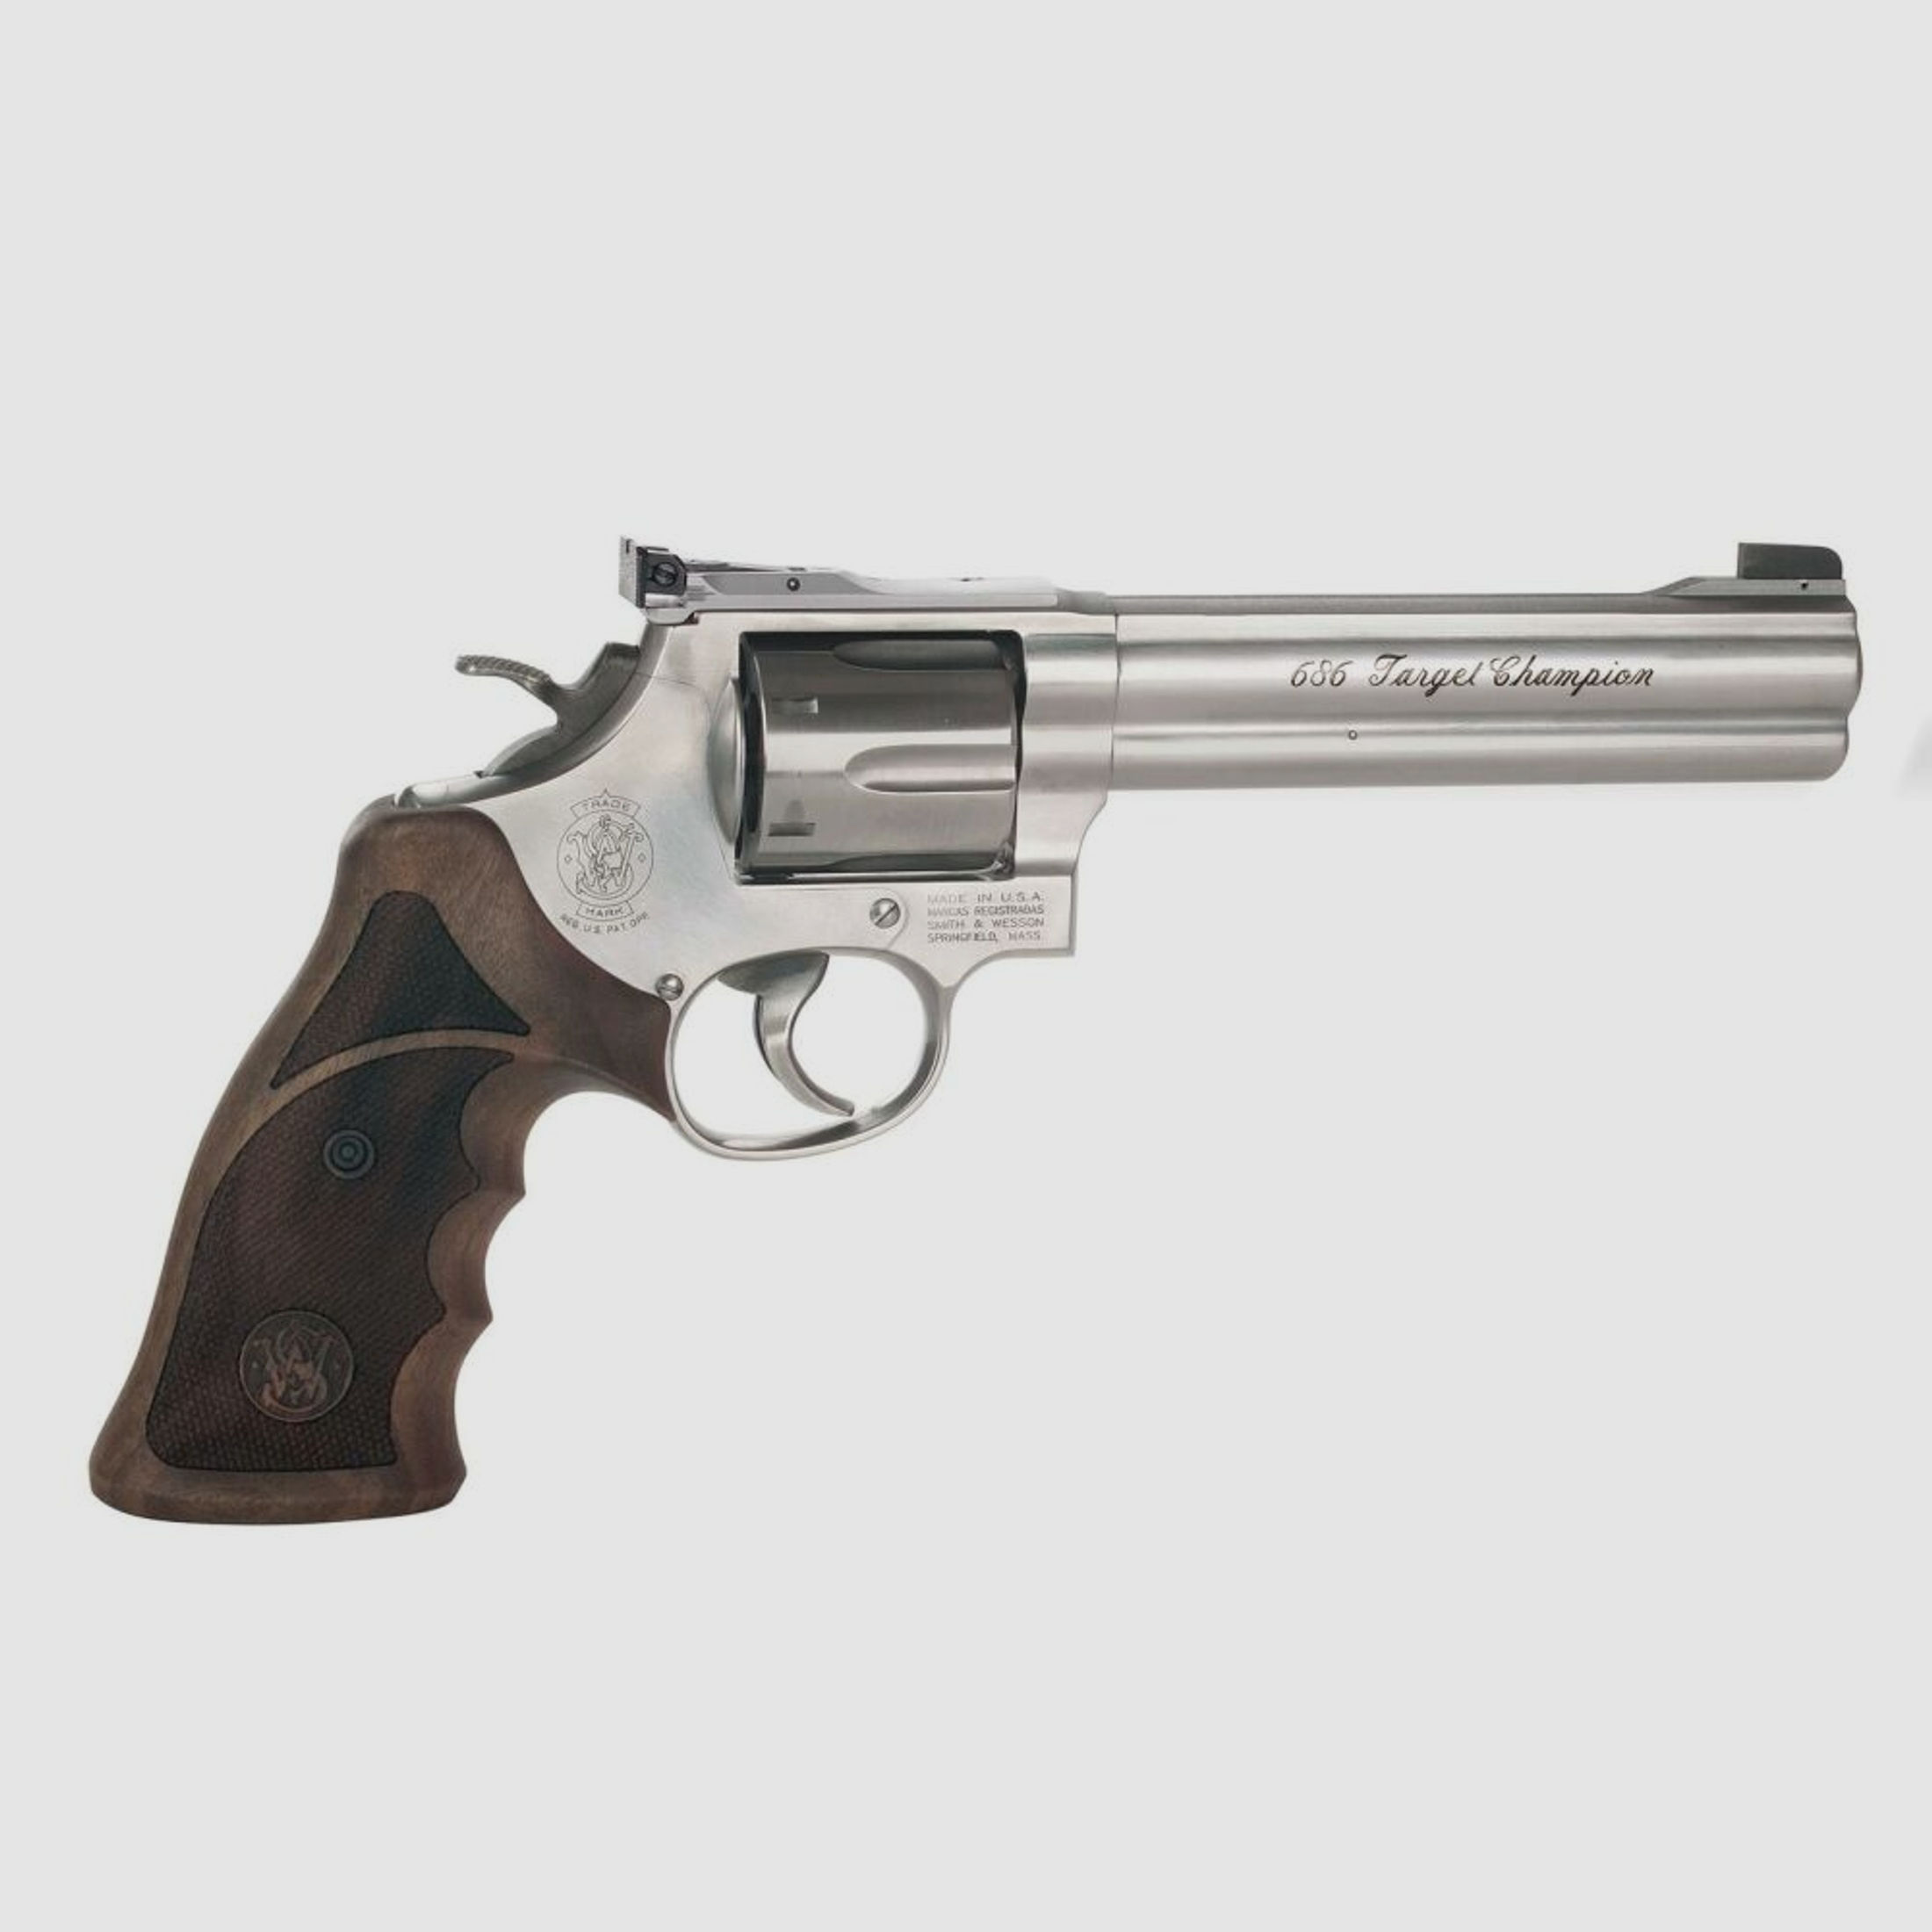 S&W Smith & Wesson	 S&W Revolver Mod. 686 - .357 Mag. Target Champion